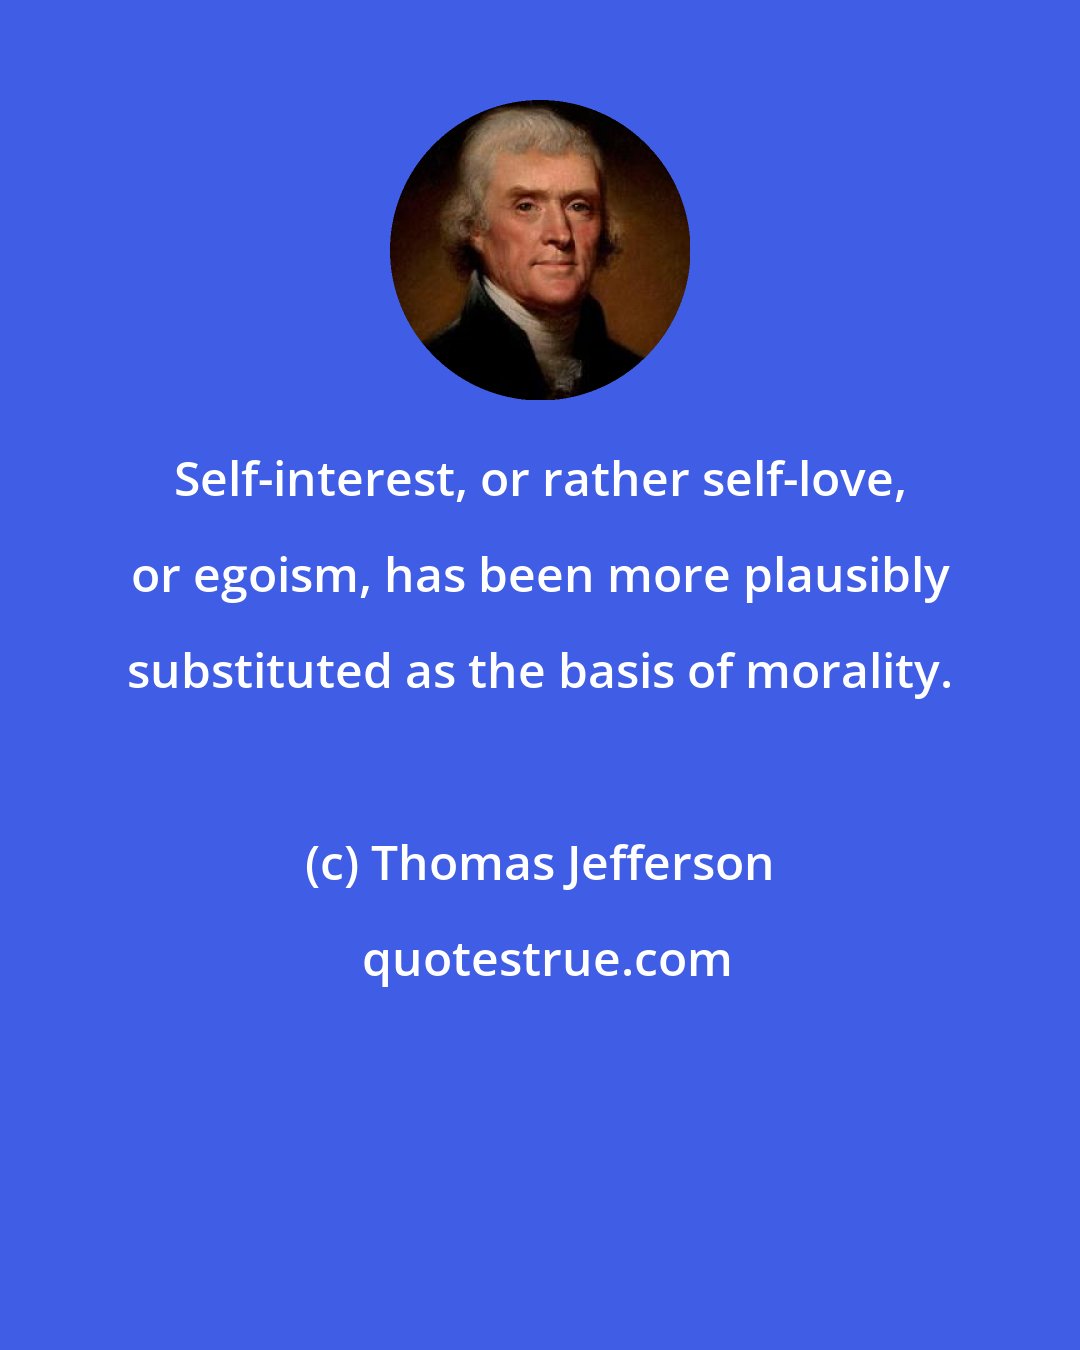 Thomas Jefferson: Self-interest, or rather self-love, or egoism, has been more plausibly substituted as the basis of morality.